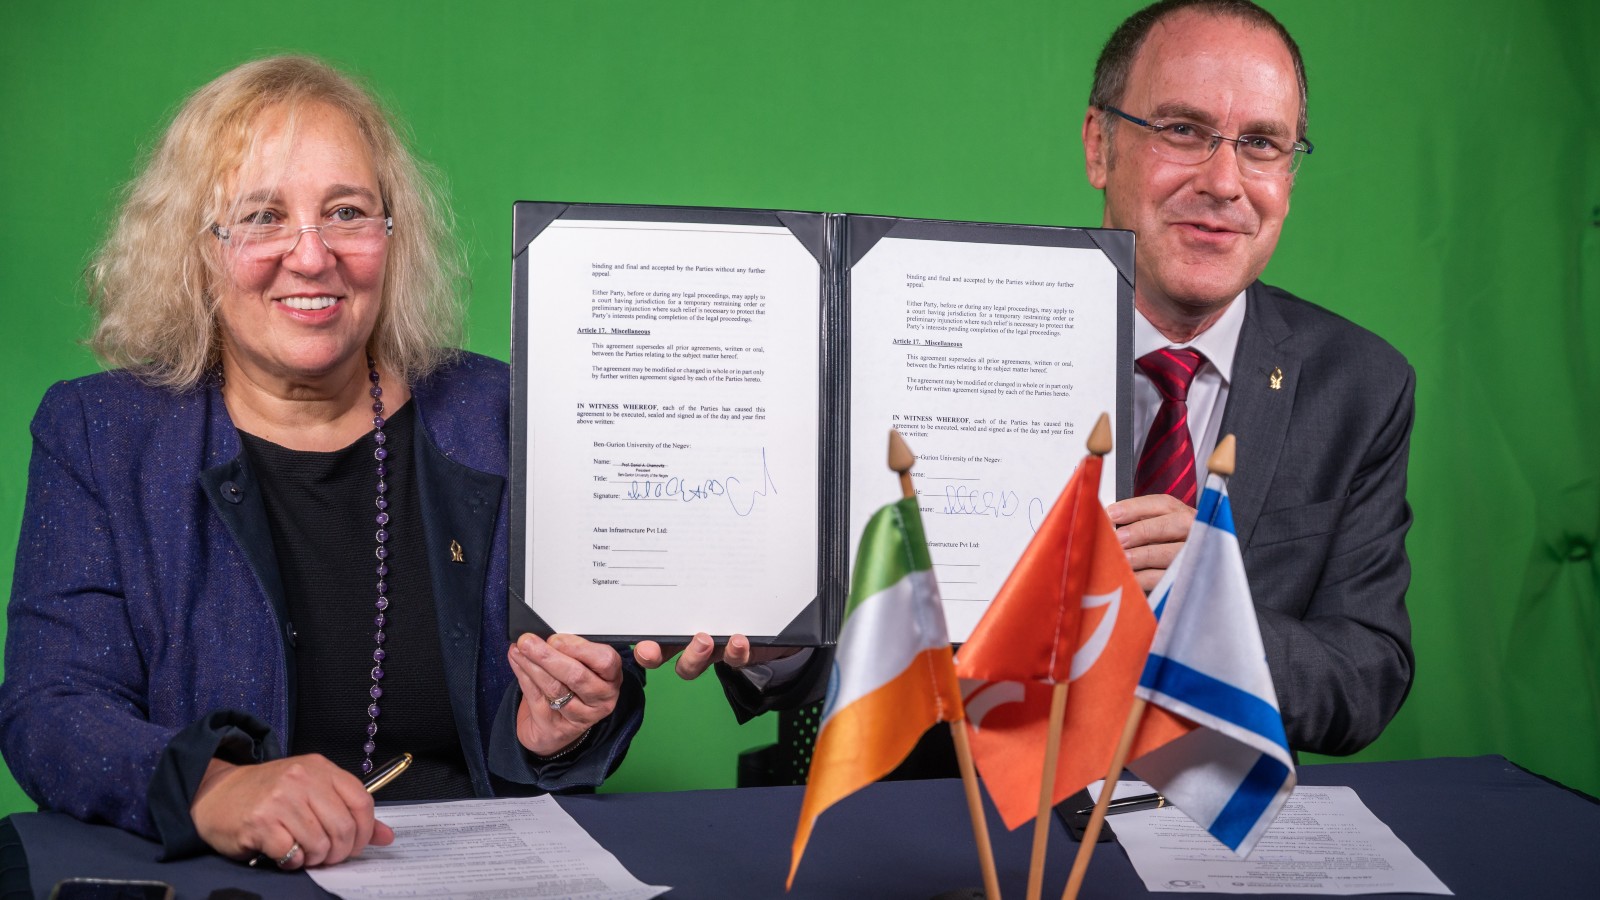 Ben-Gurion University of the Negev VP for Global Engagement Prof. Limor Aharonson-Daniel and President Prof. Daniel Chamovitz sign an agreement to develop a joint agricultural research institute in Chennai, India with Indian firm Aban. Photo by Dani Machlis/BGU